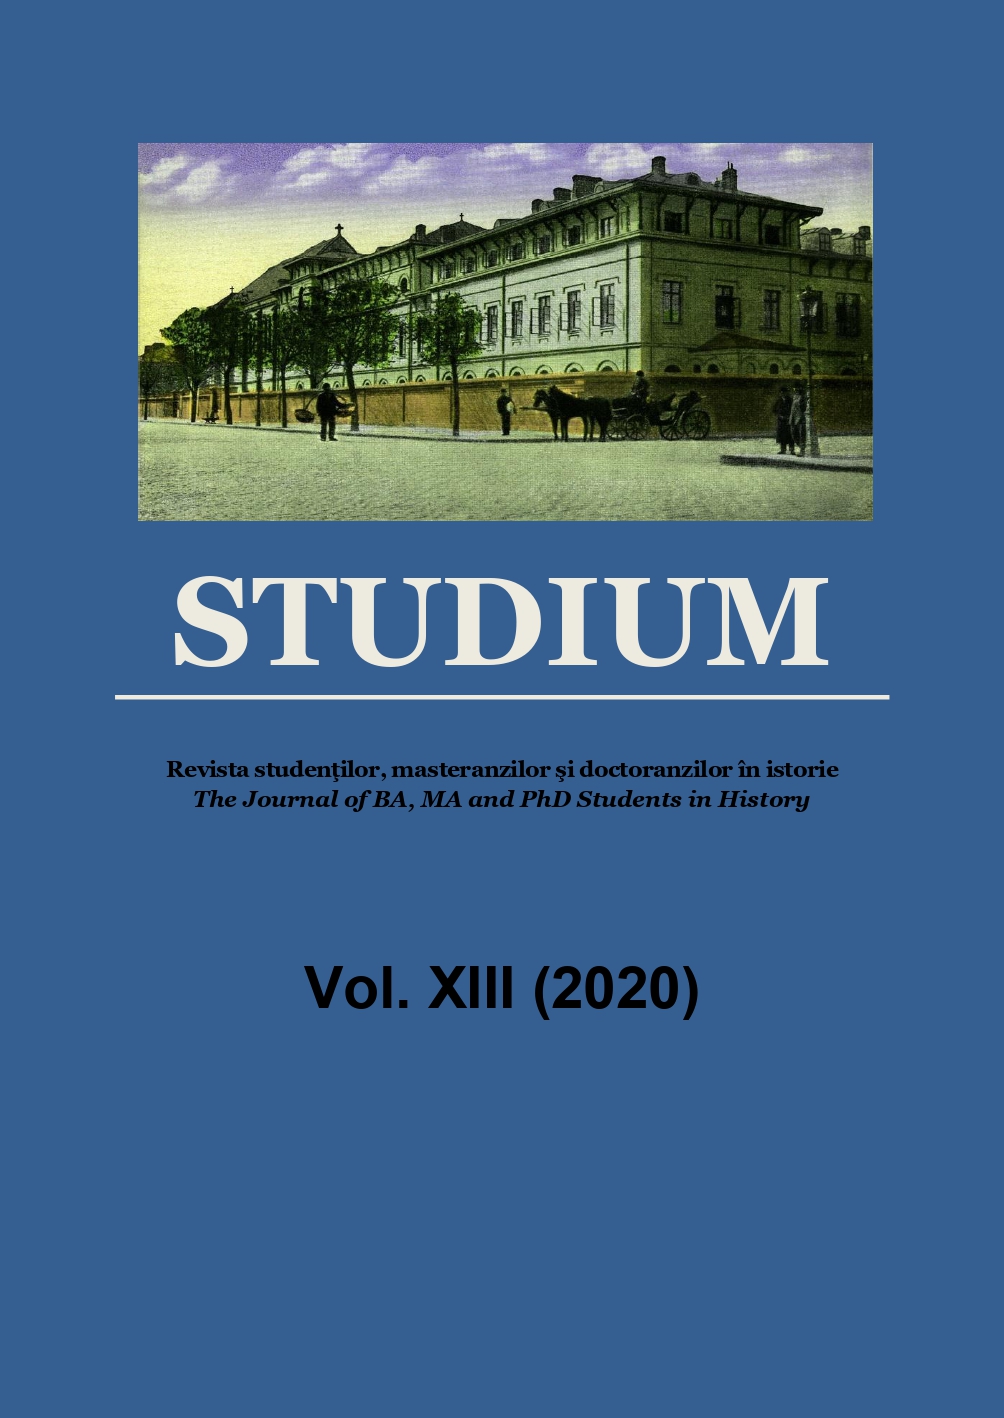 Studium - The Journal of BA, MA and PhD Students in History